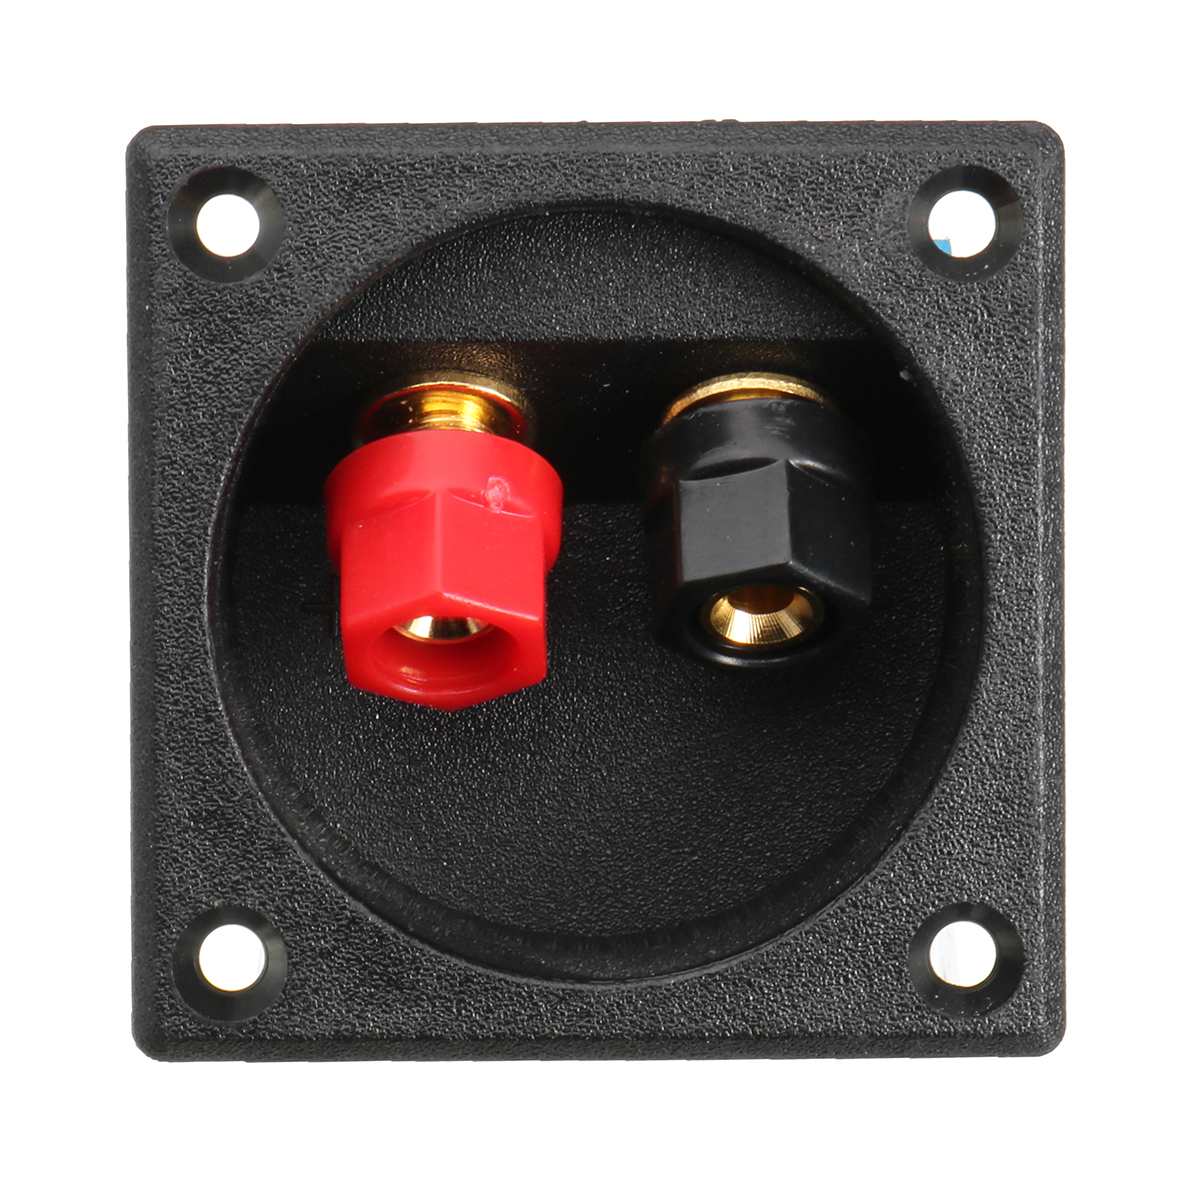 5pcs-WEAH-D222-80W-Speaker-Frequency-Divider-With-Junction-Box-1341433